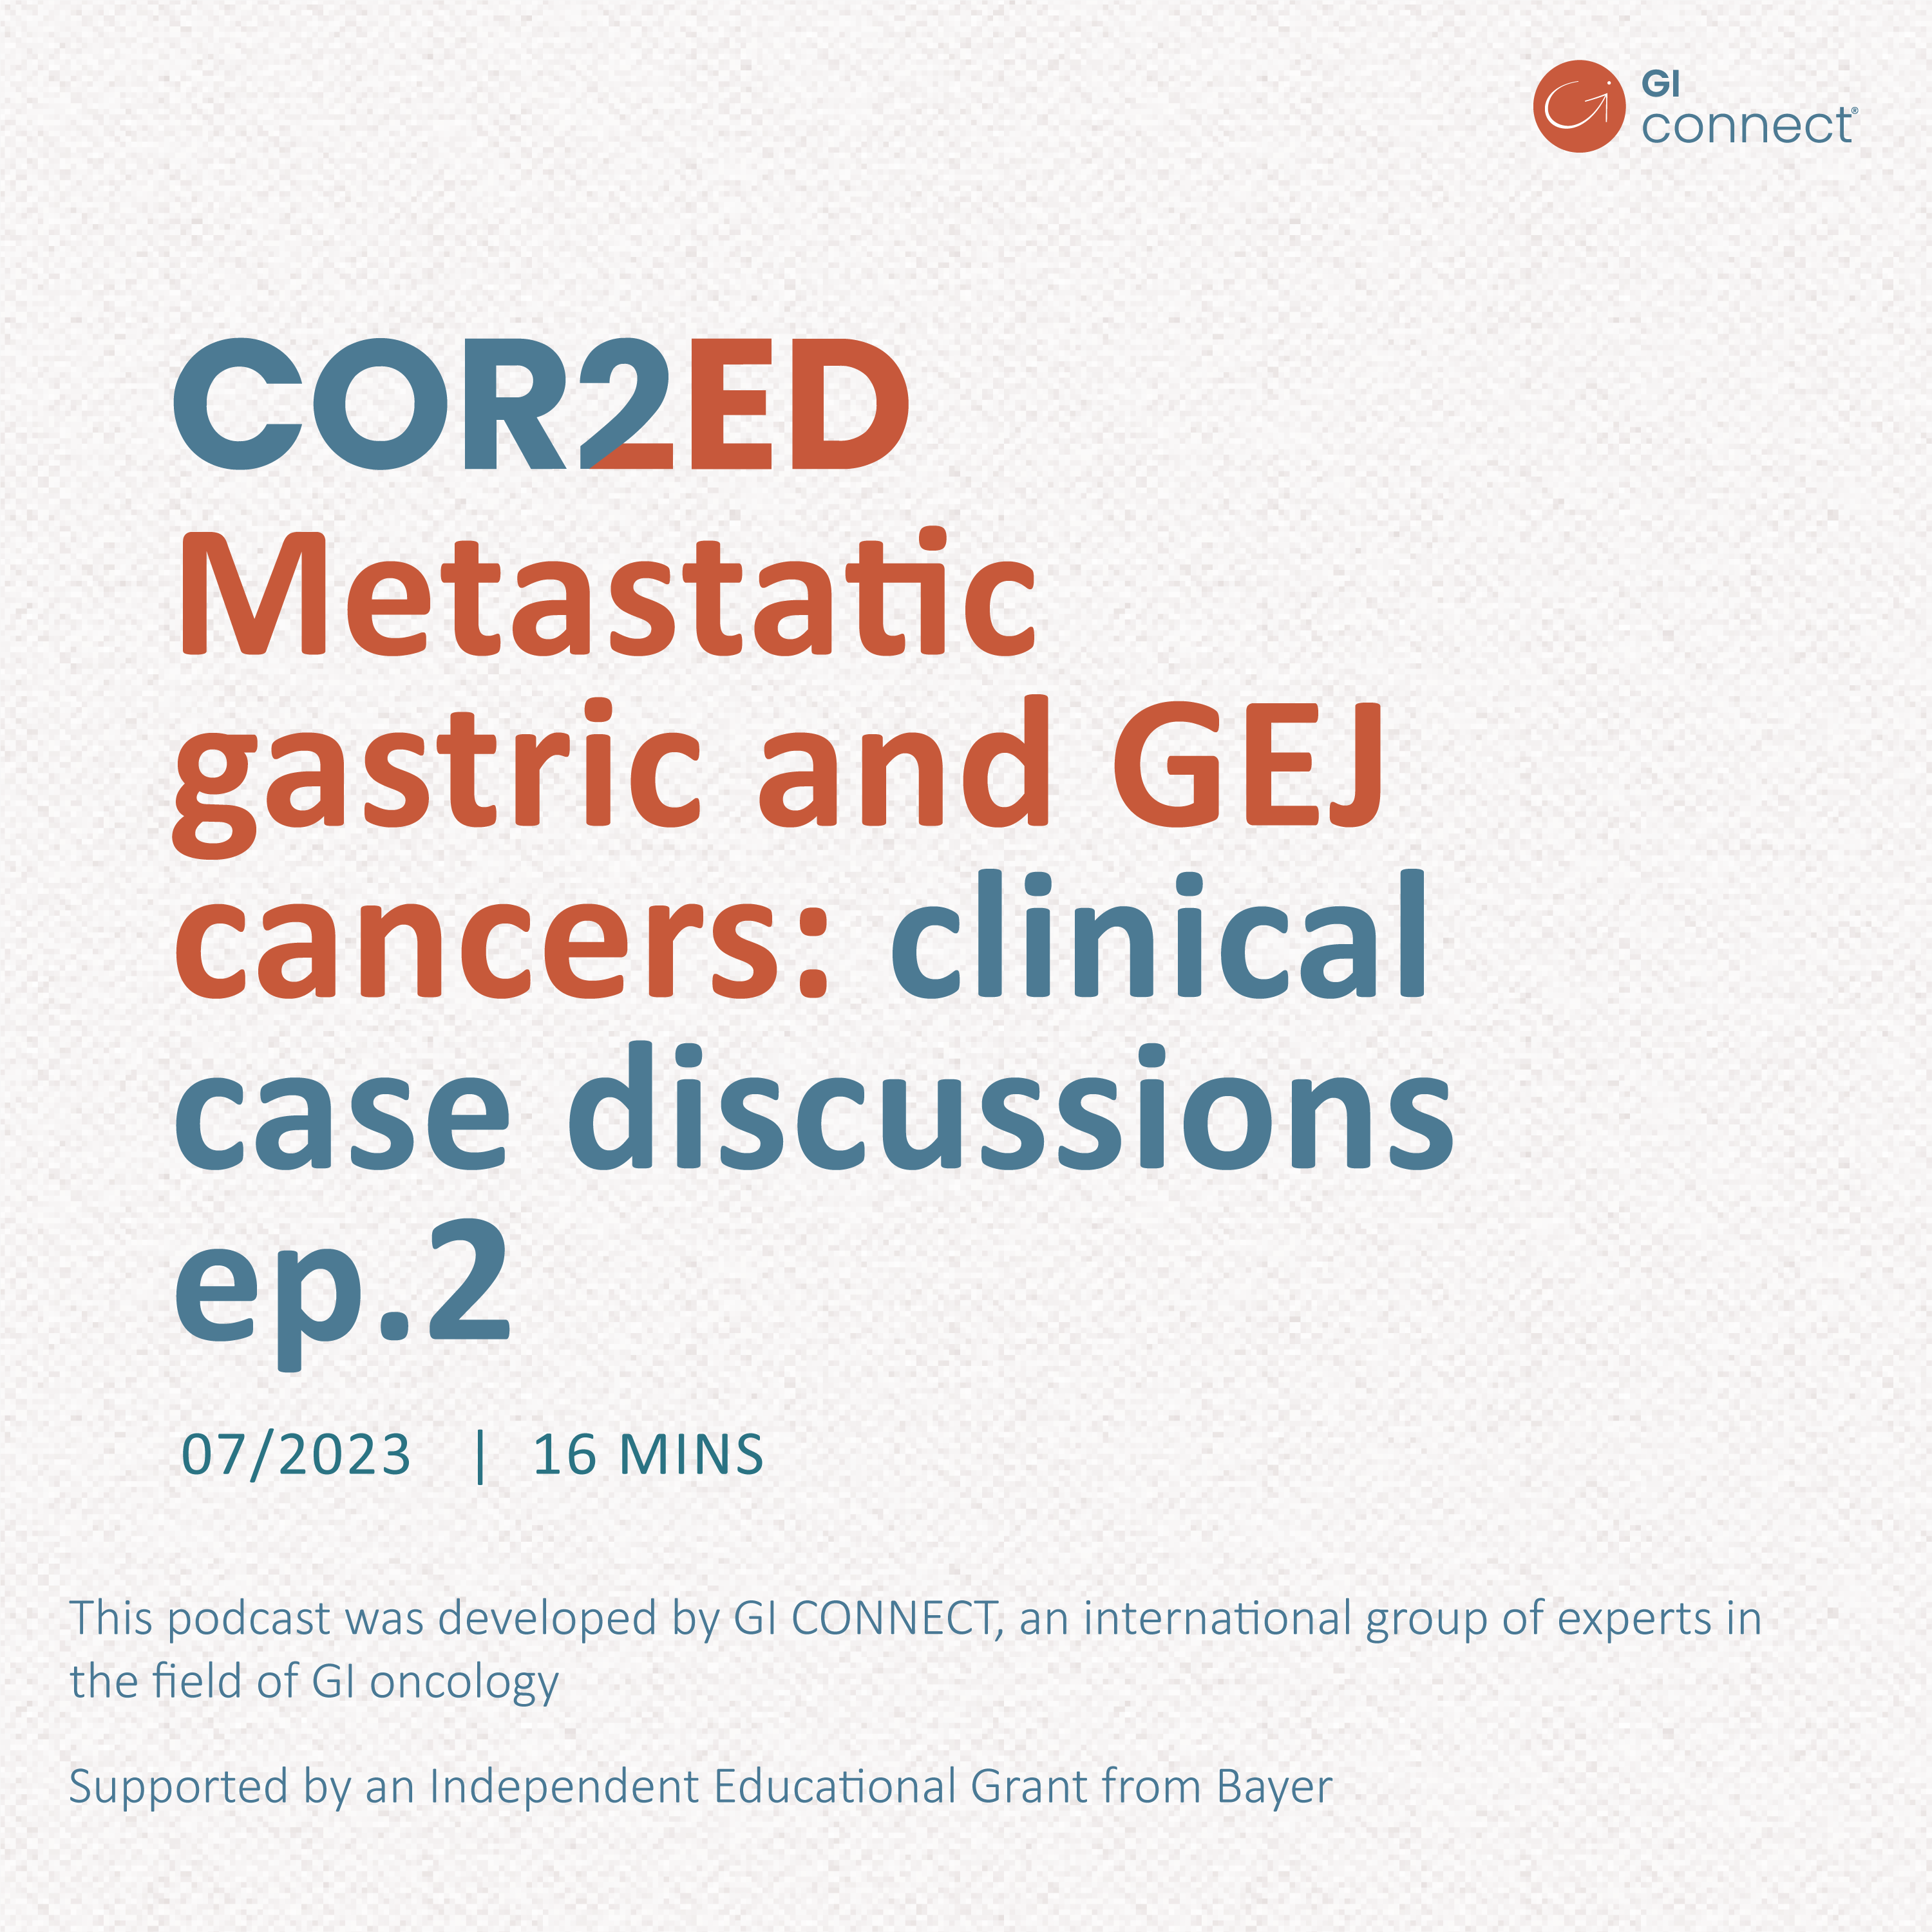 Metastatic gastric and GEJ cancers: clinical case discussions ep.2